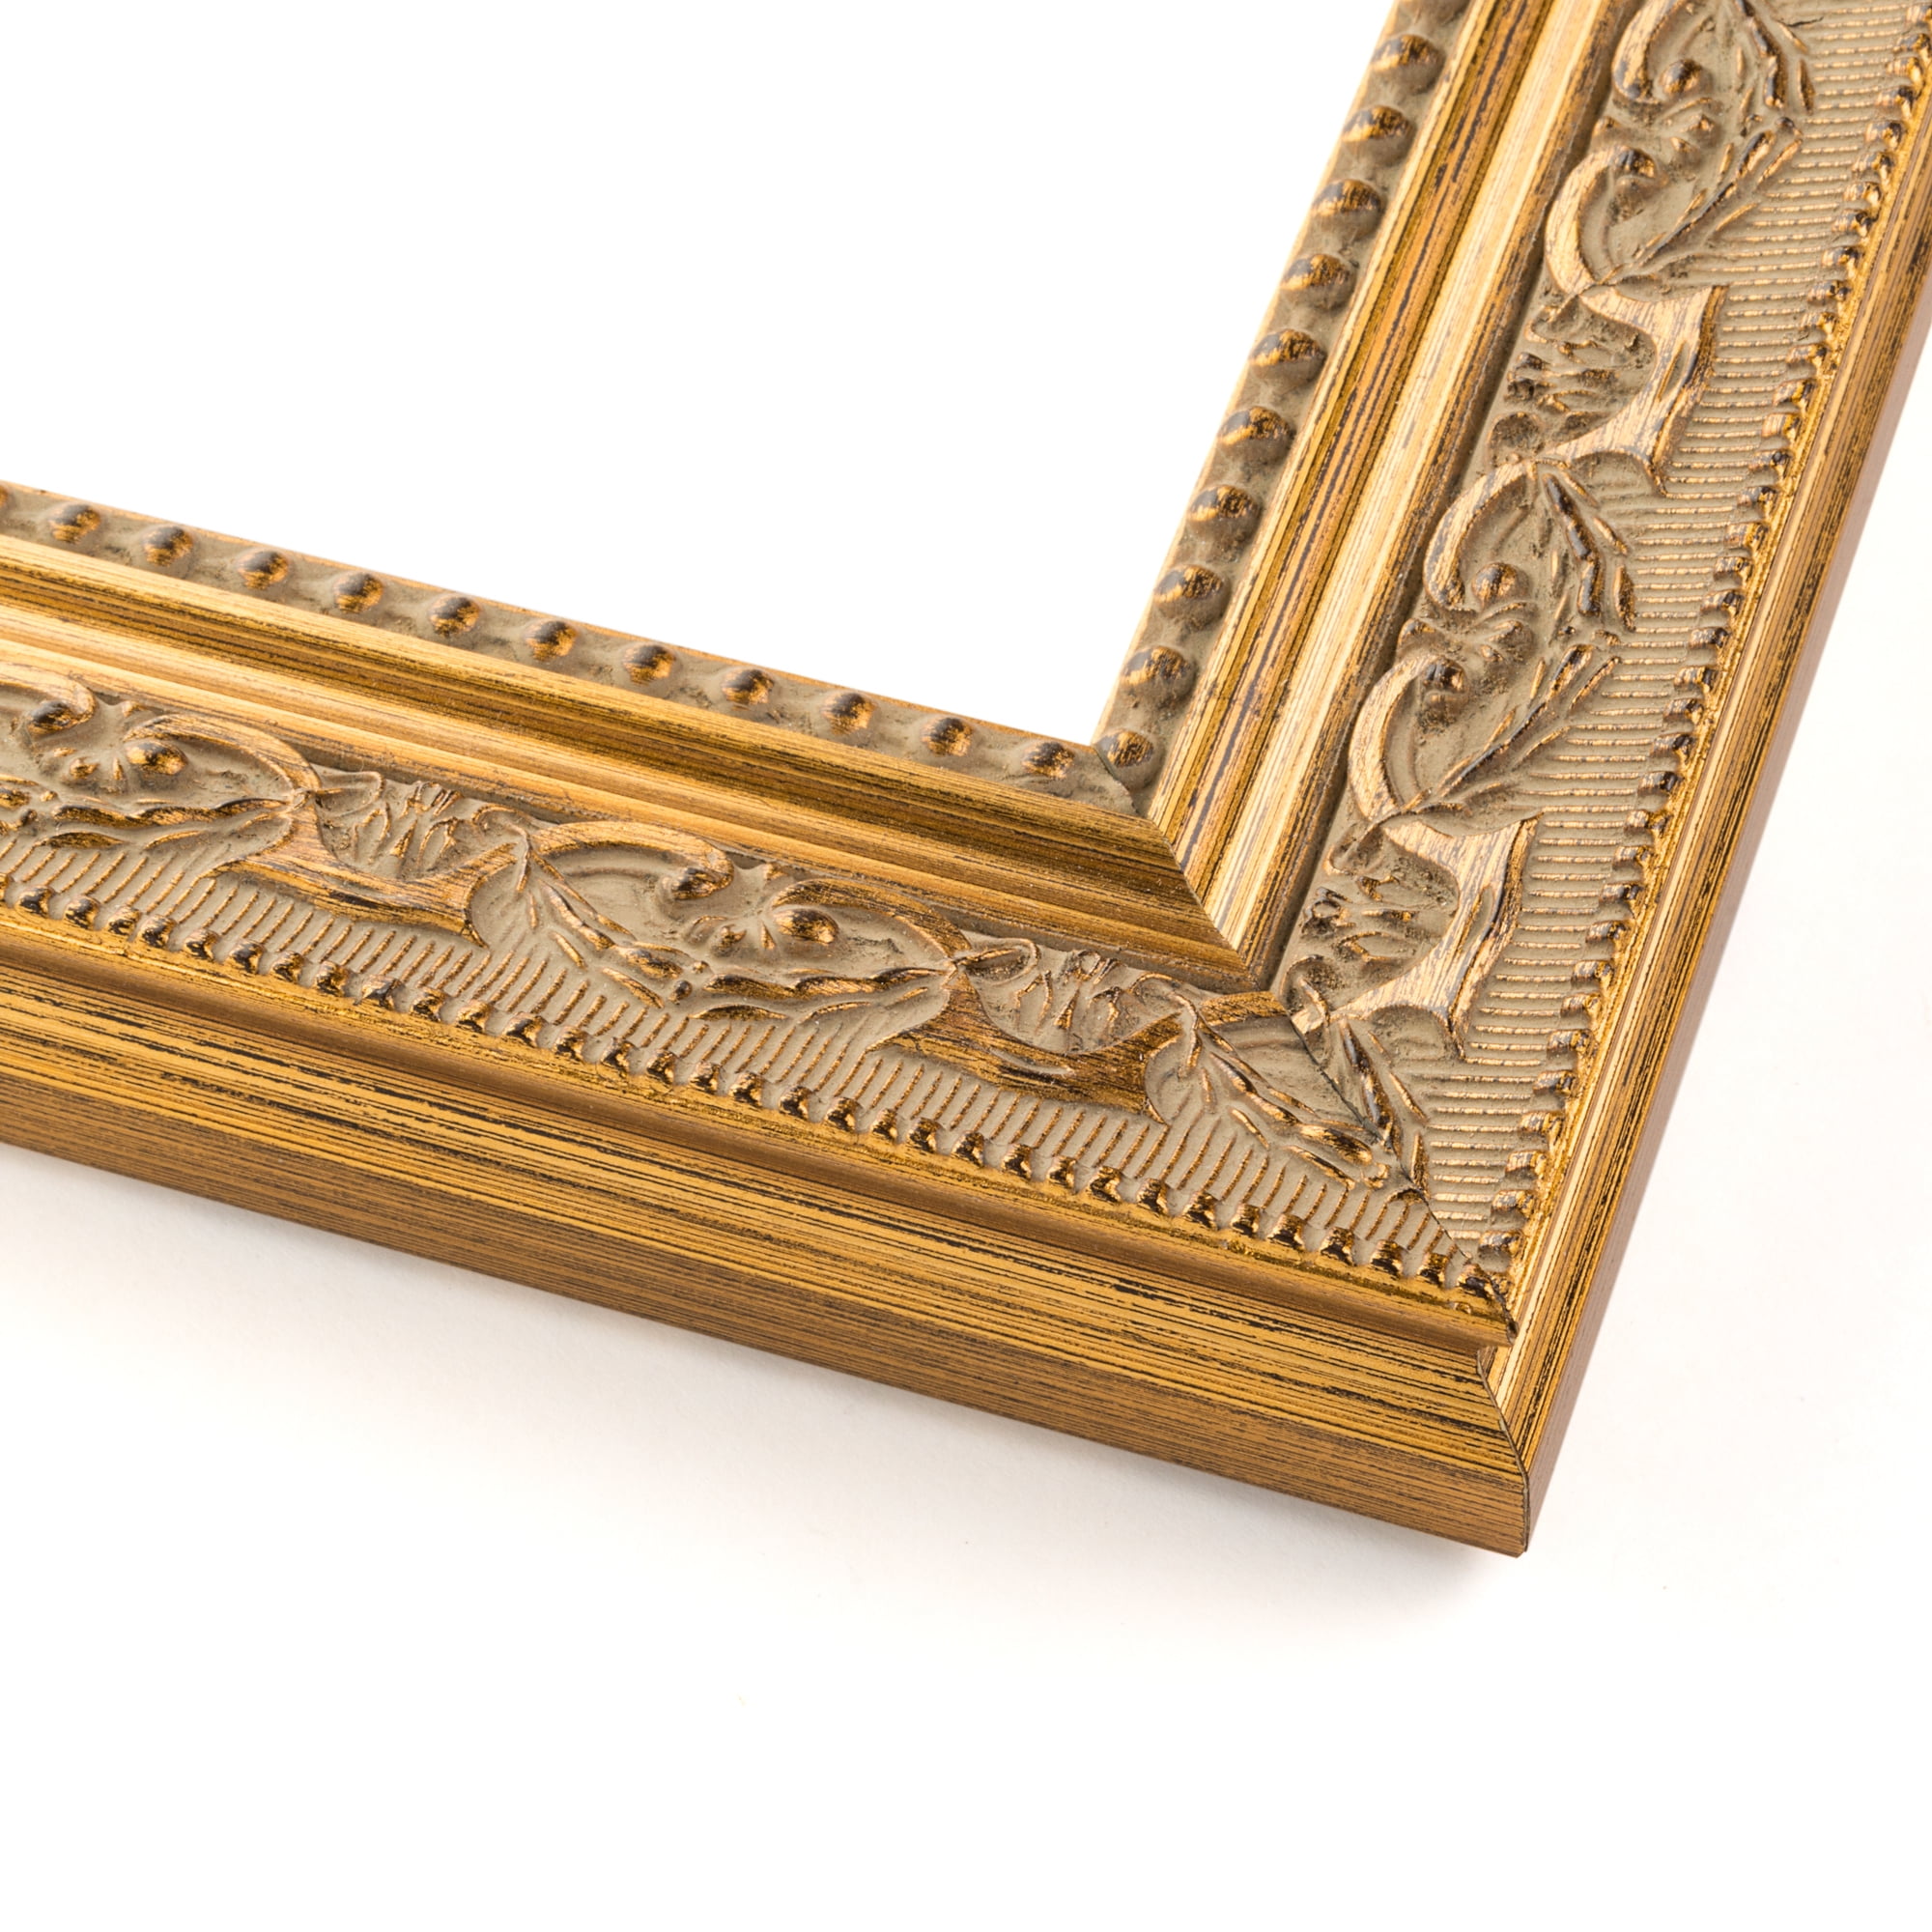 CustomPictureFrames.com 22x11 Frame Gold Real Wood Picture Frame Width 1.75 Inches | Interior Frame Depth 0.5 Inches | Museum Gold Ornate Photo Frame